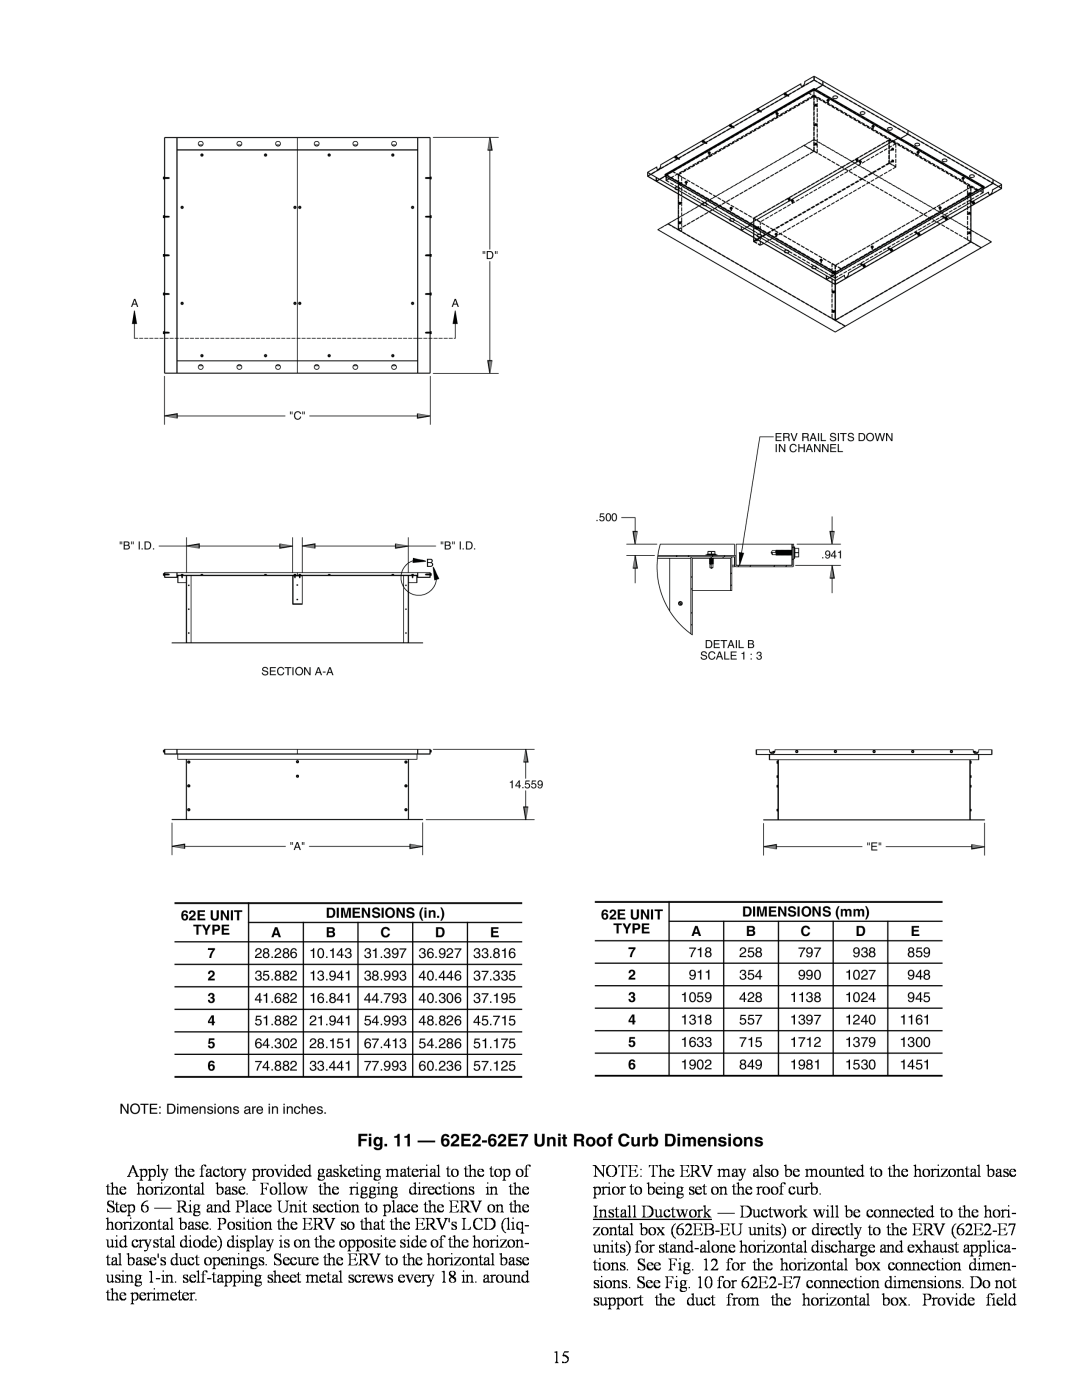 Carrier specifications a62-442, 62E2-62E7Unit Roof Curb Dimensions 